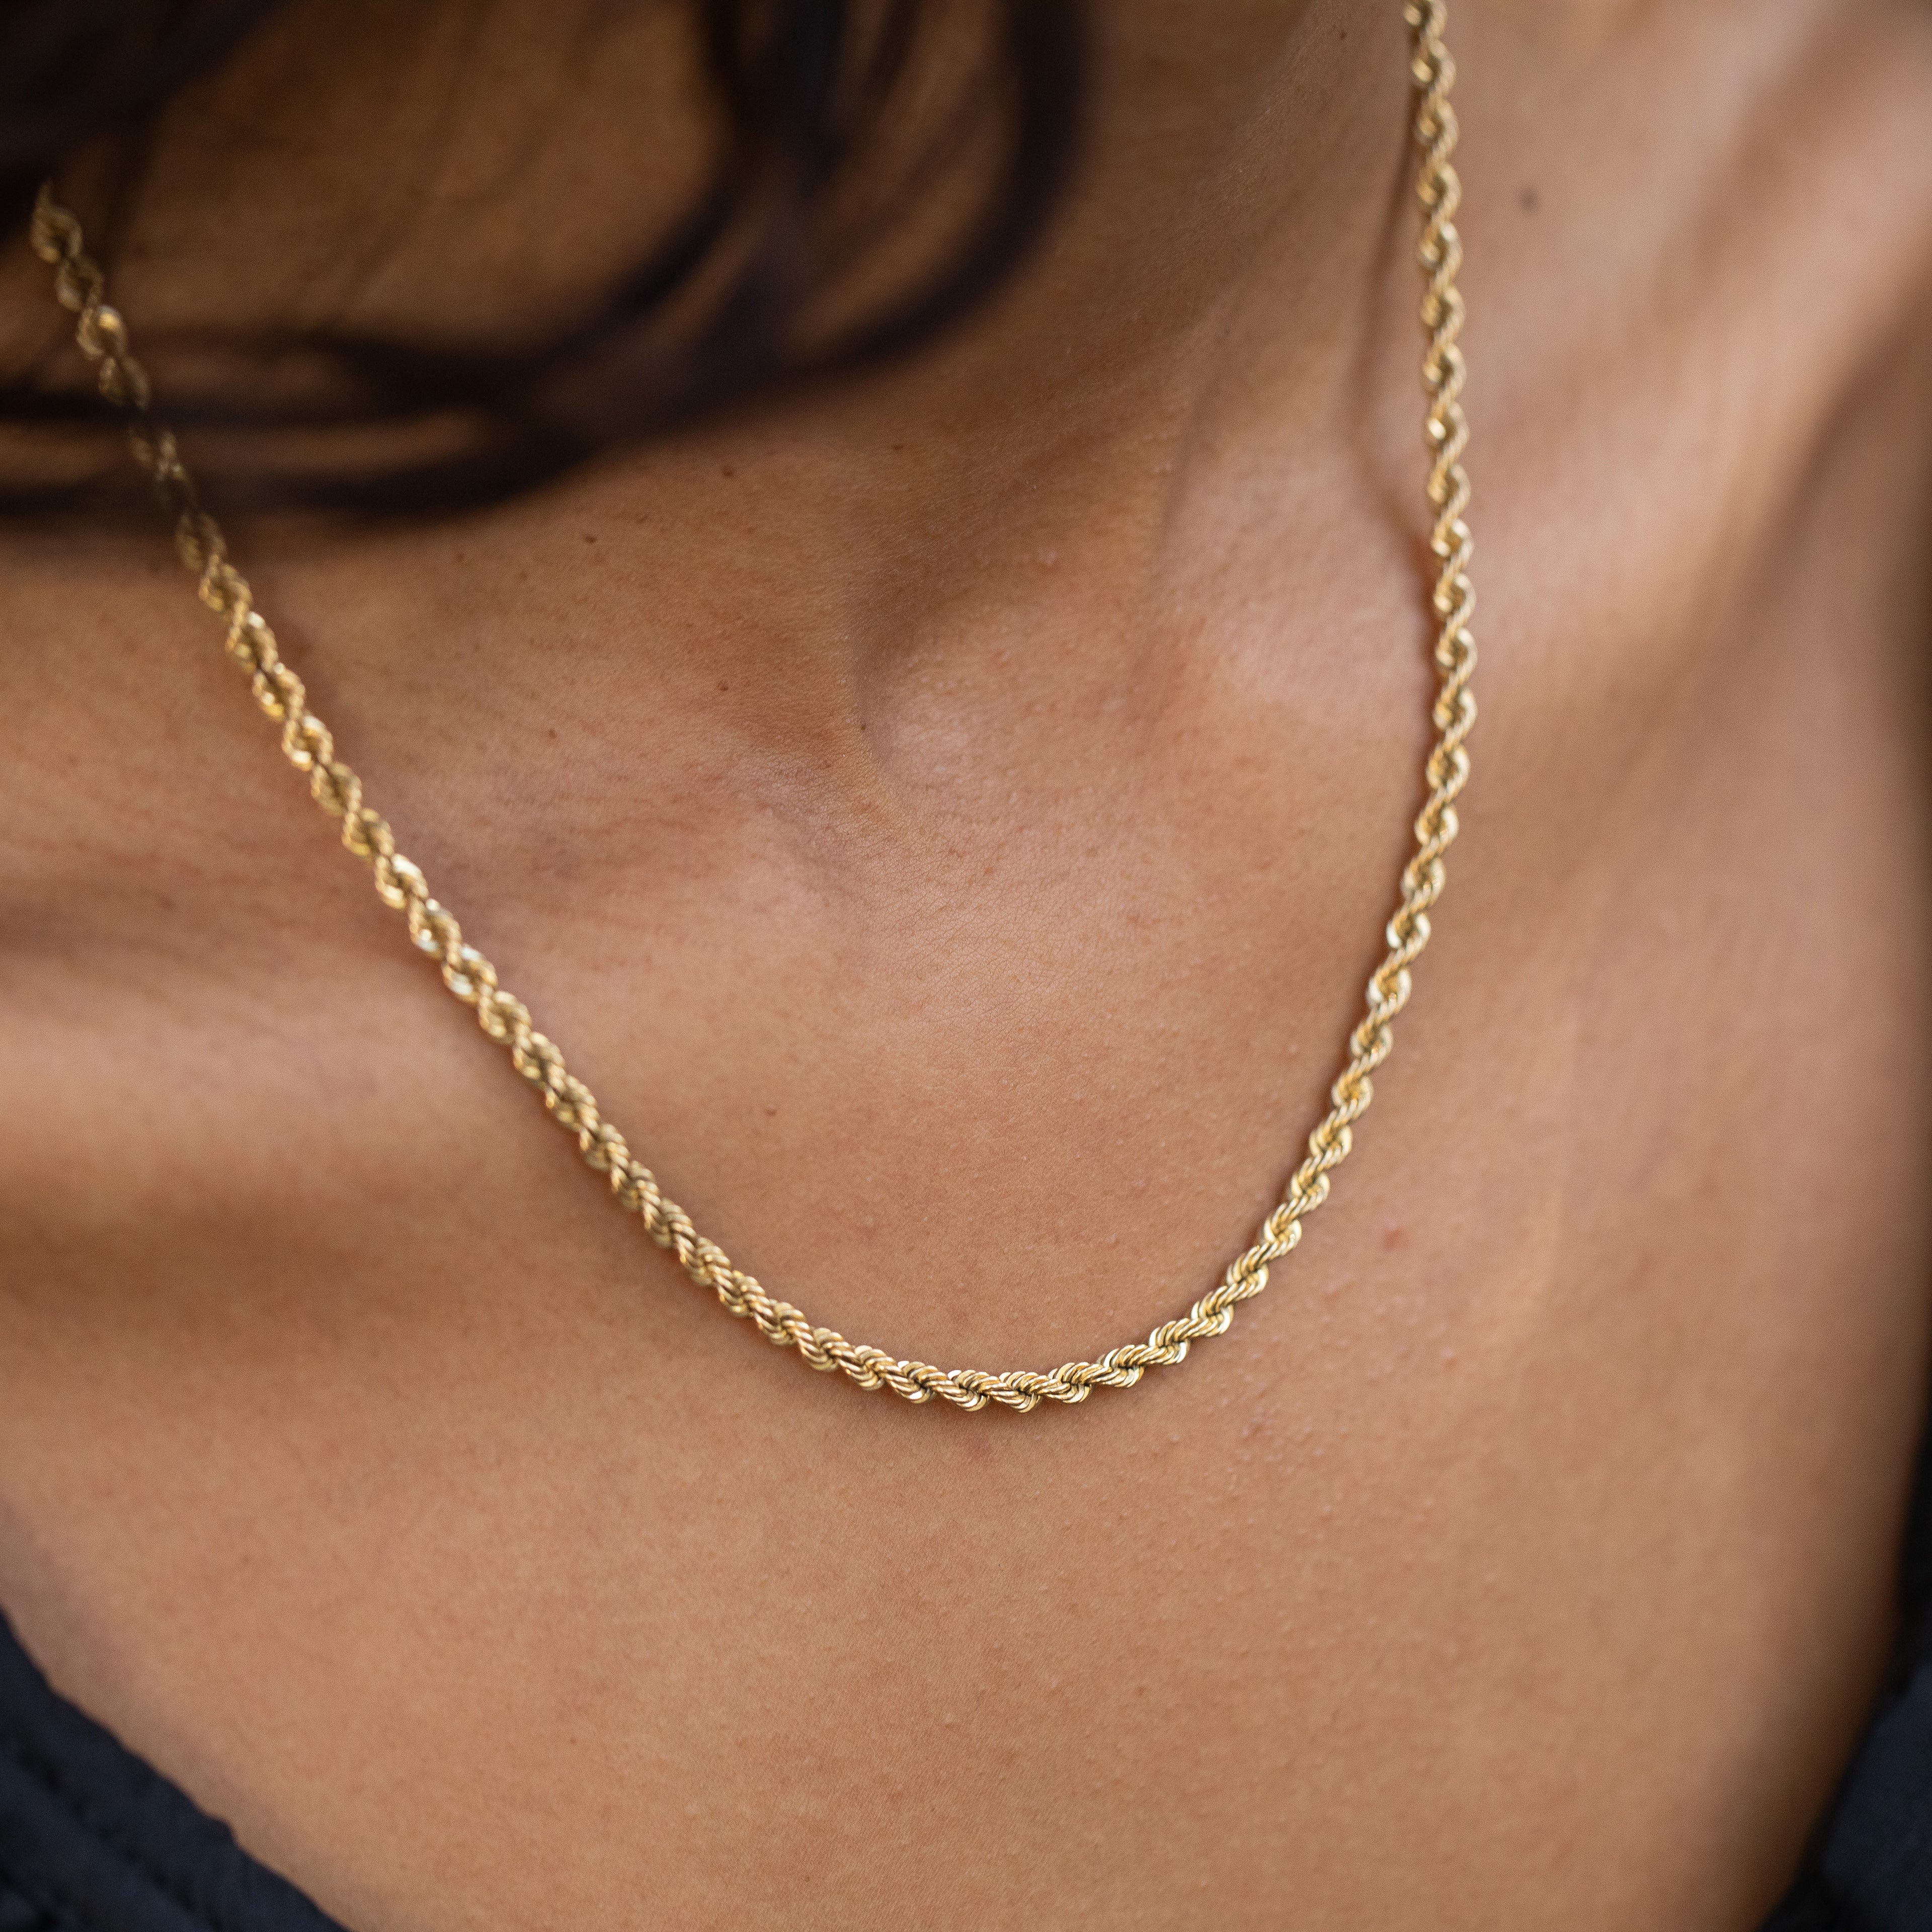 Roped 14k Gold 18" Chain Necklace